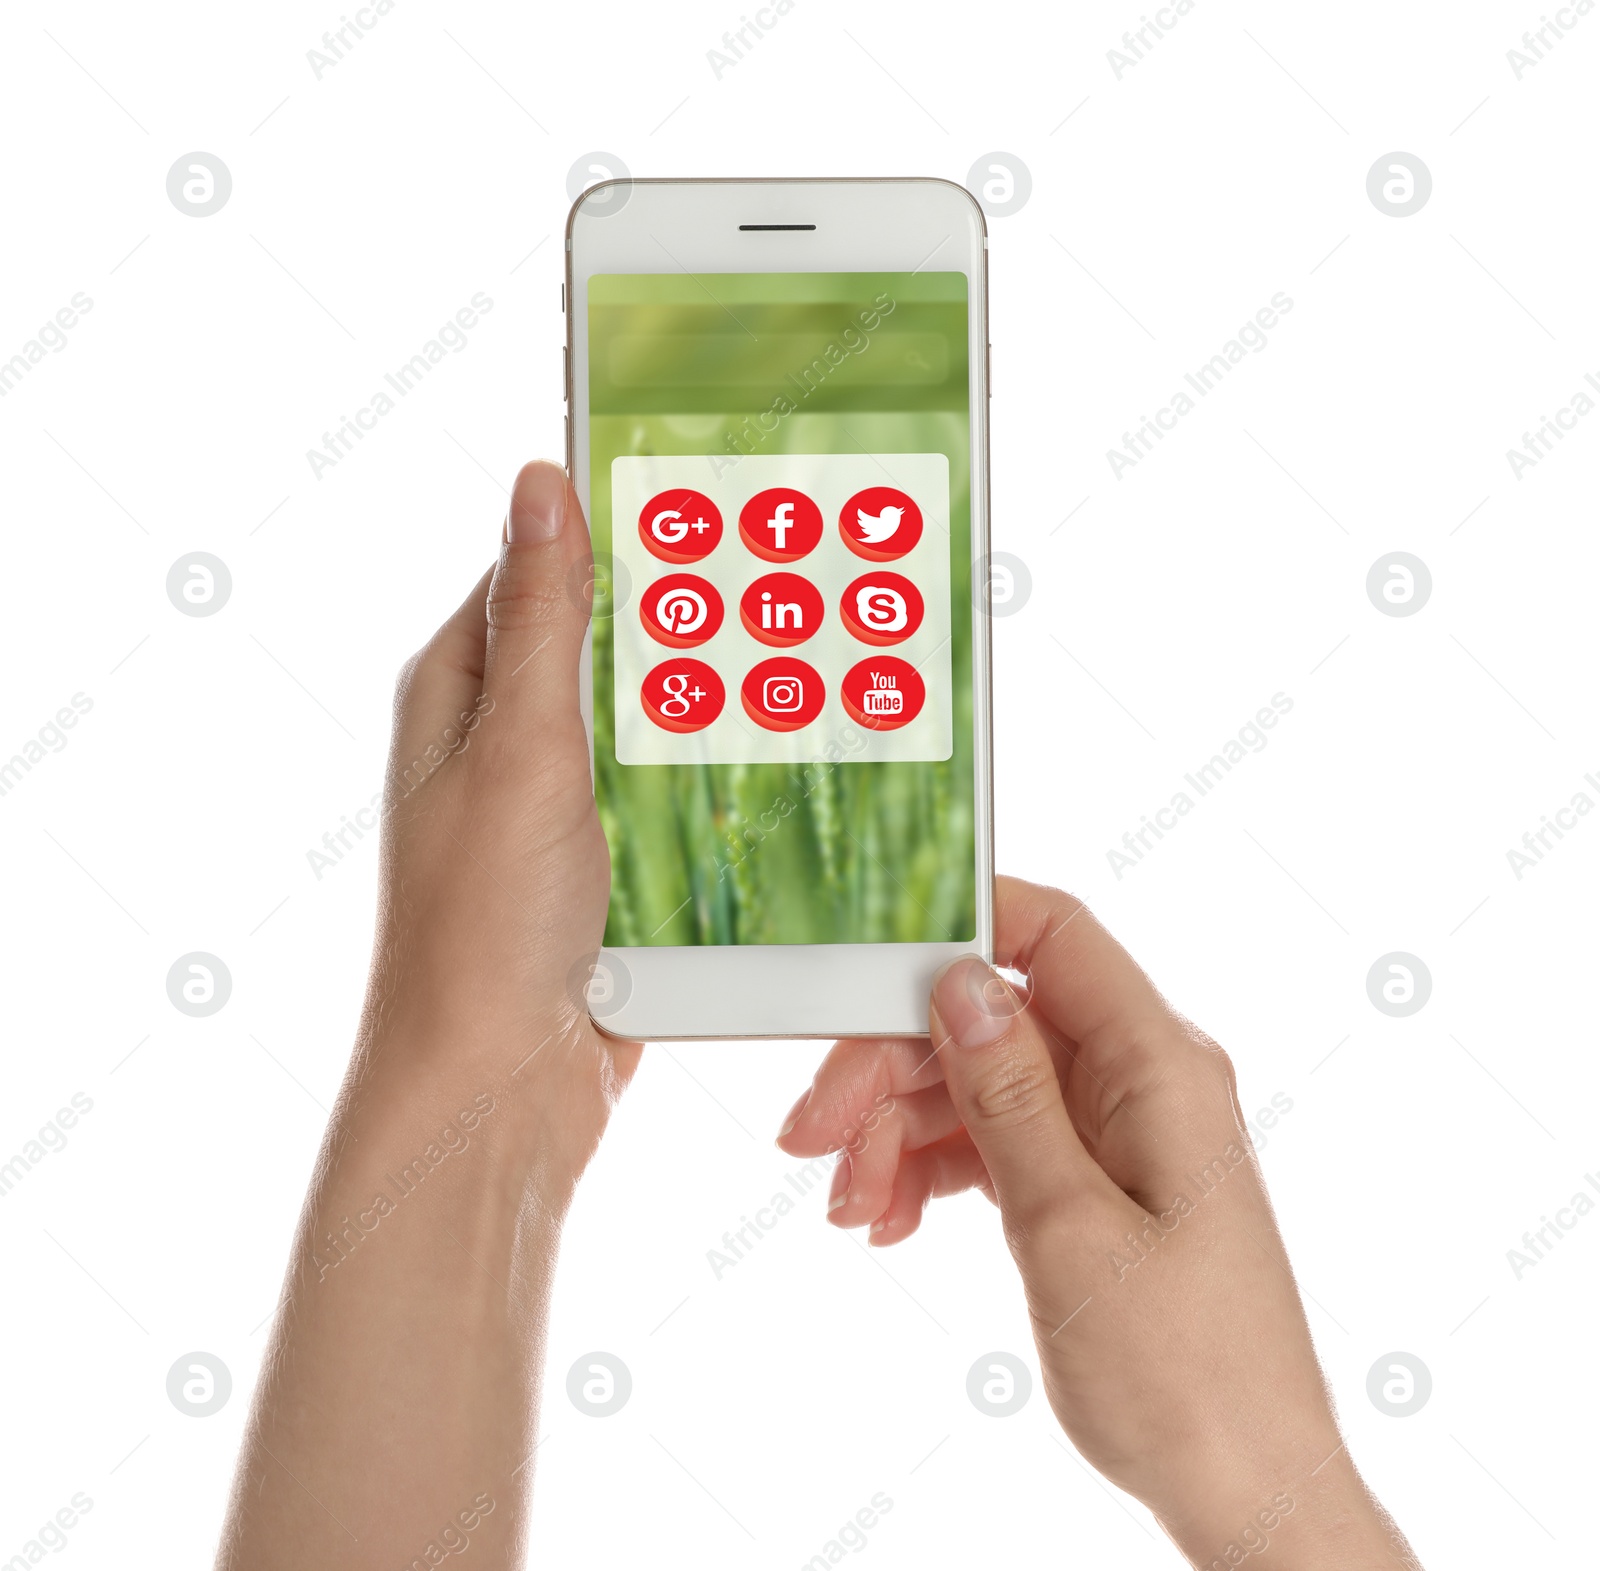 Image of MYKOLAIV, UKRAINE - APRIL 30, 2020: Woman holding phone with social media apps icons on white background, closeup